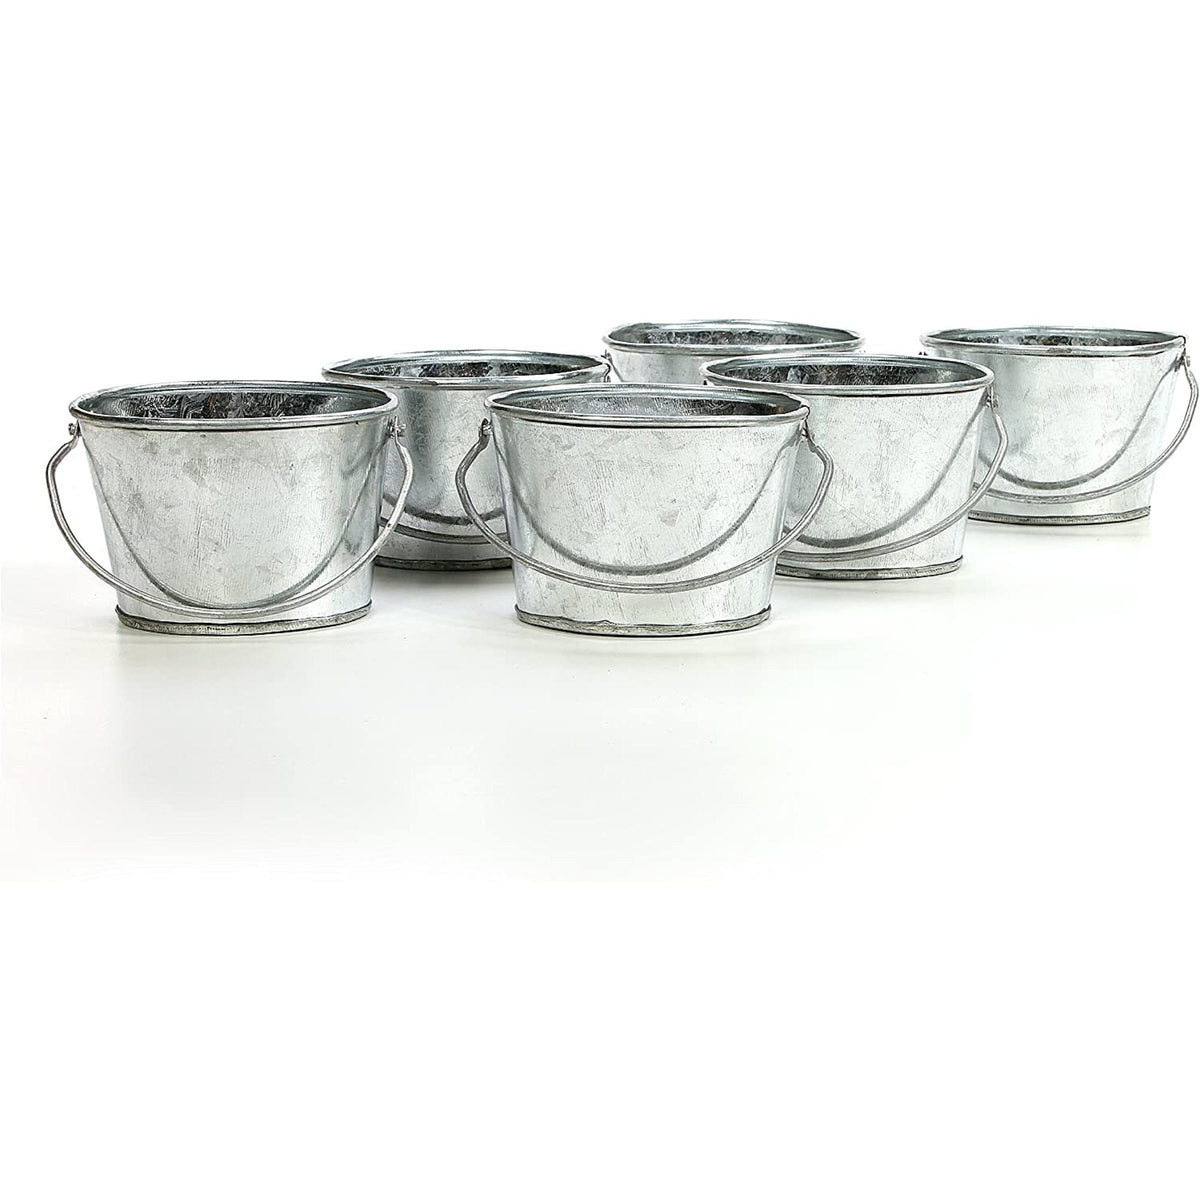 HOSLEY®Iron Mini Galvanized Planter, Set of 6, 3.8 inches Long each Oval